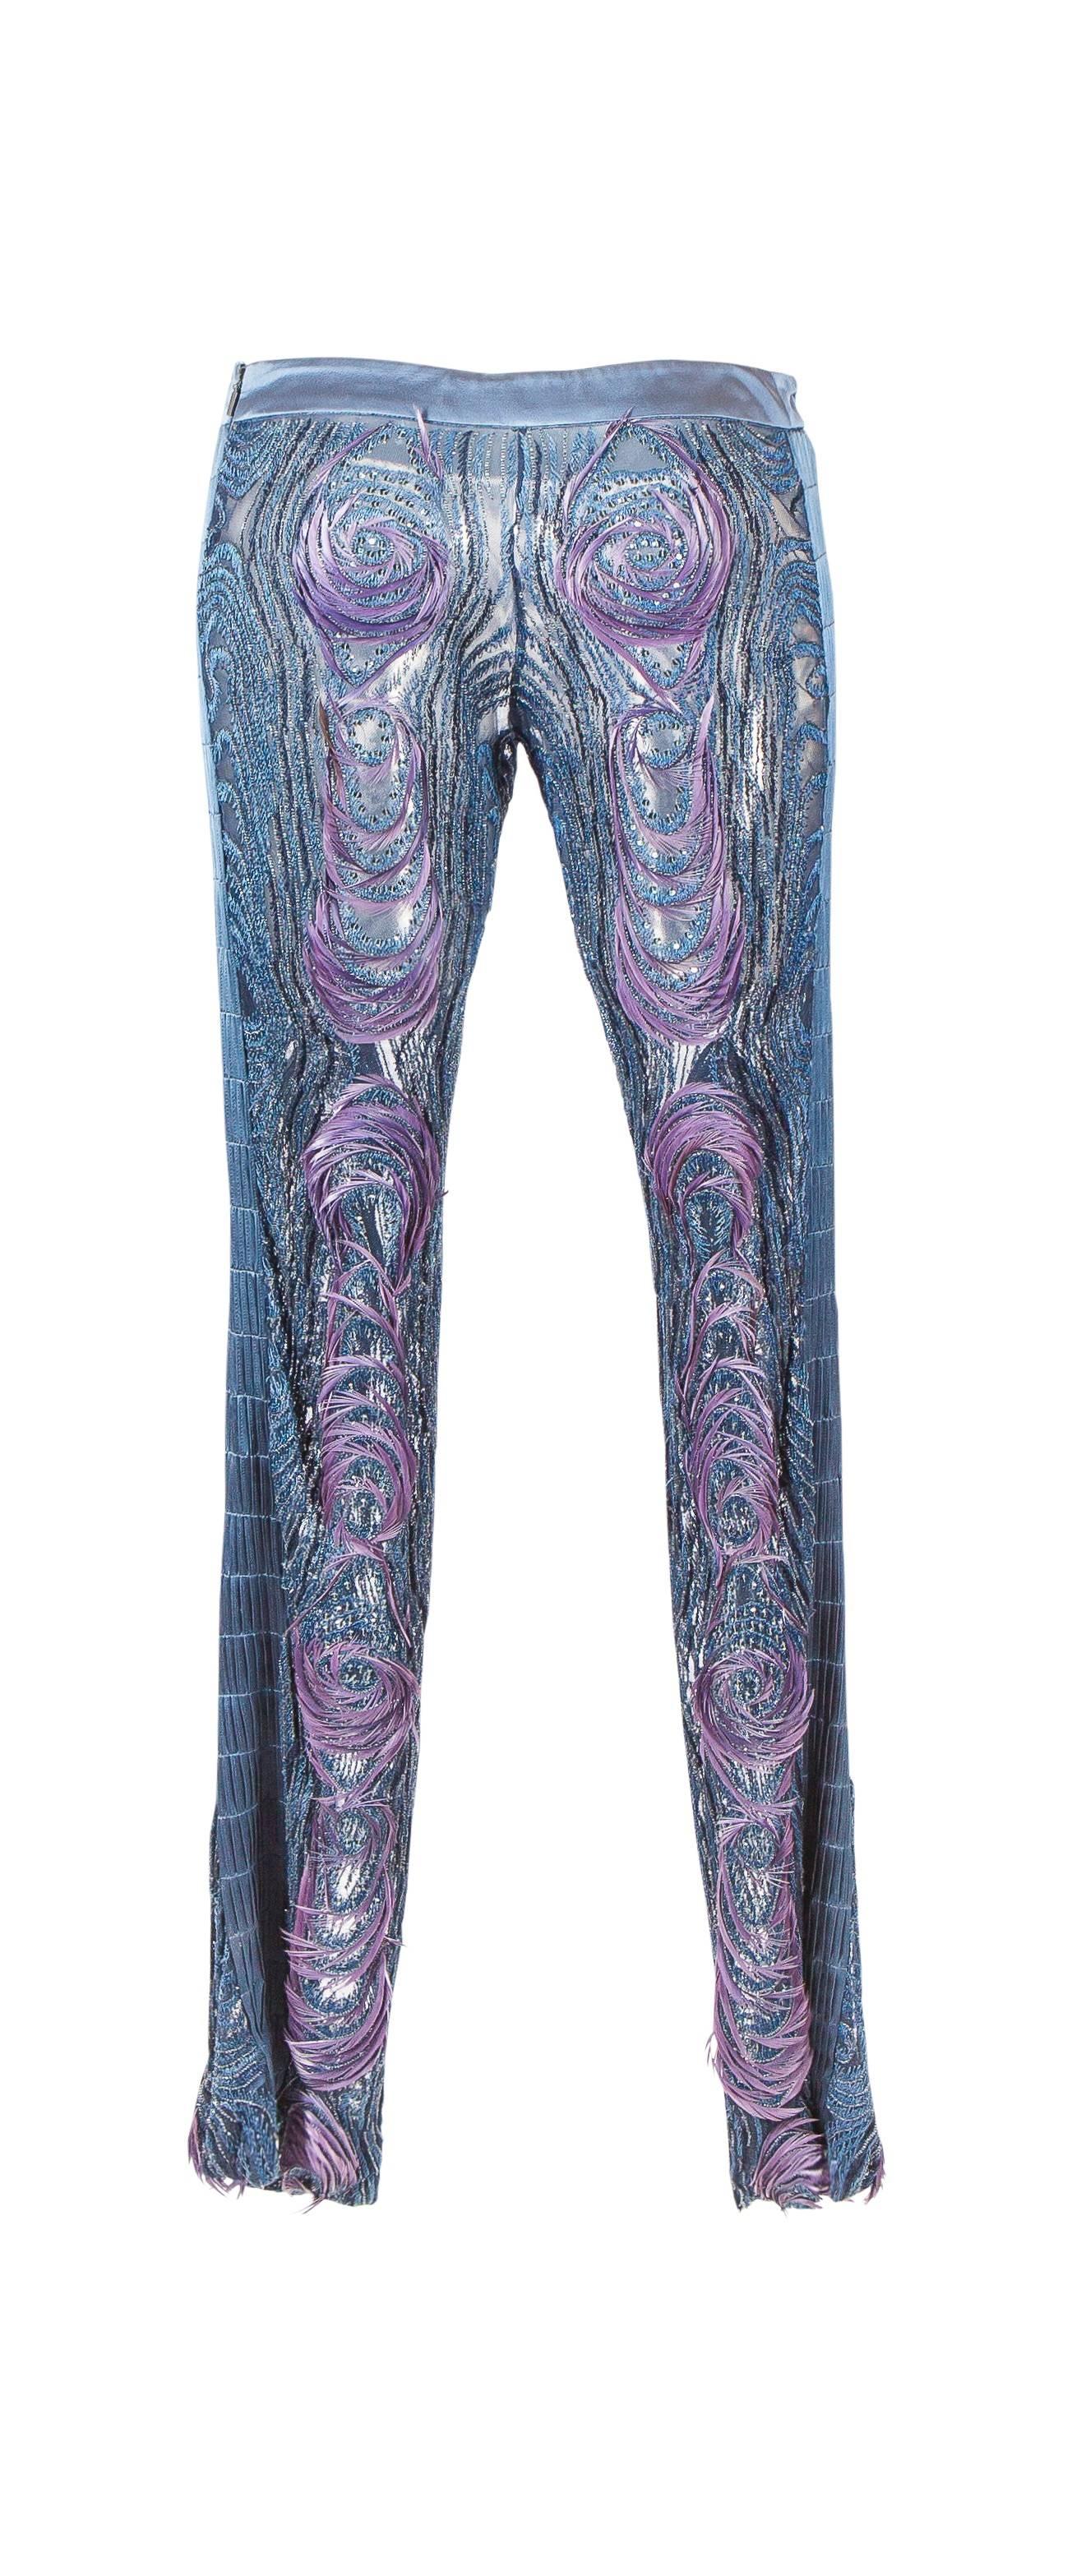 Important Tom Ford For Gucci blue and purple beaded and embroidered silk mesh pants, with feather embellishment from 2003.

Marked an Italian size 38.

Manufacturer - Zamasport S.p.a.

Please contact our stylists for additional information.